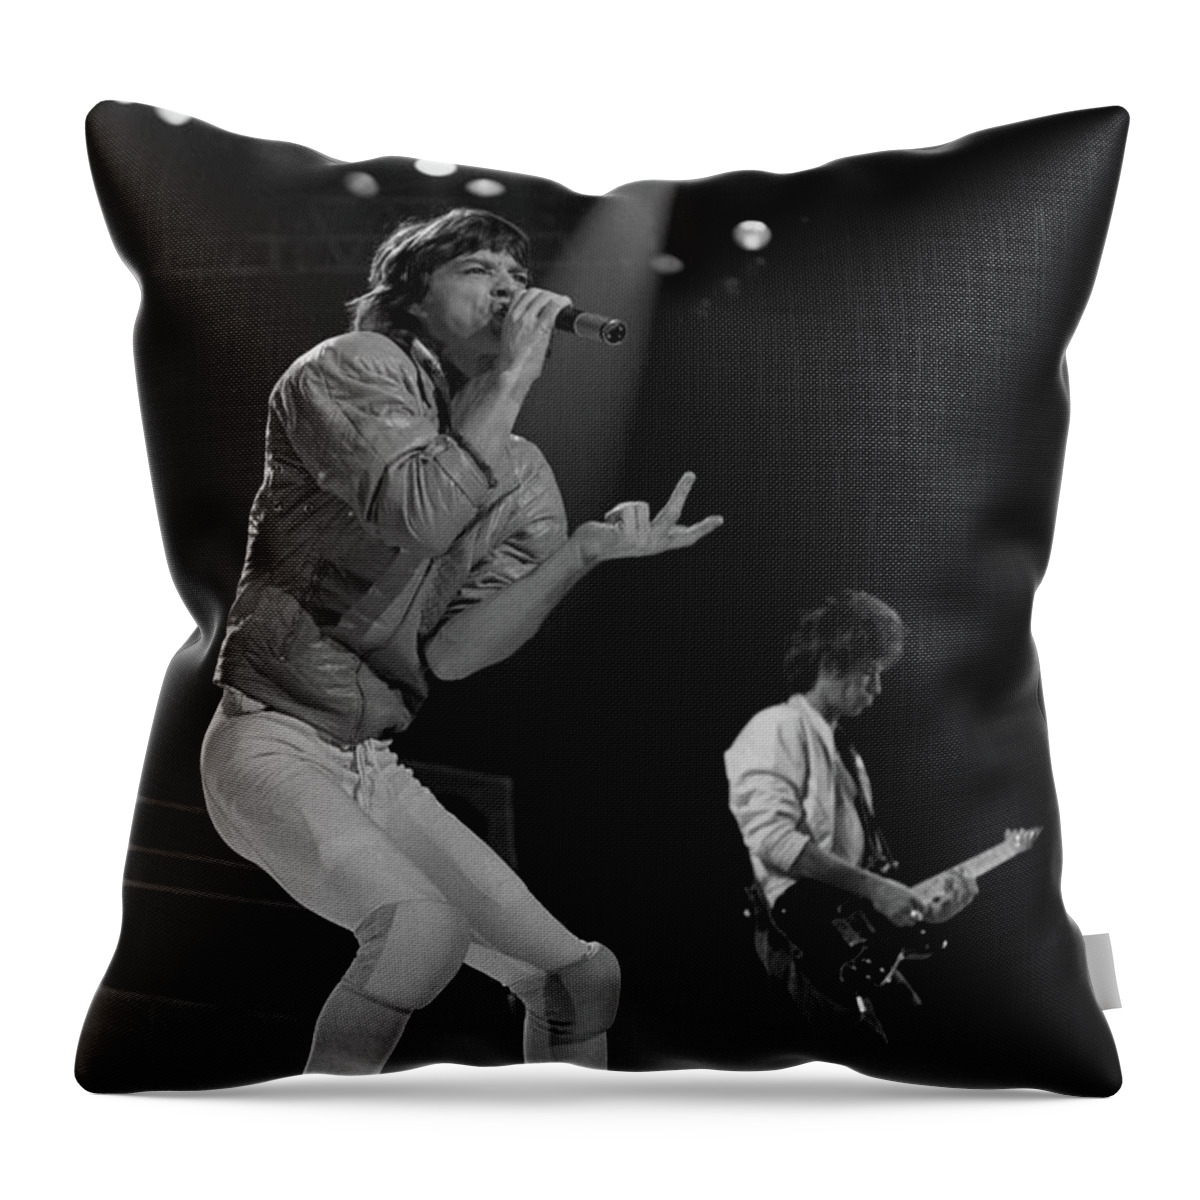 Mick Jagger Throw Pillow featuring the photograph Mick Jagger and Keith Richards on Stage by Jurgen Lorenzen